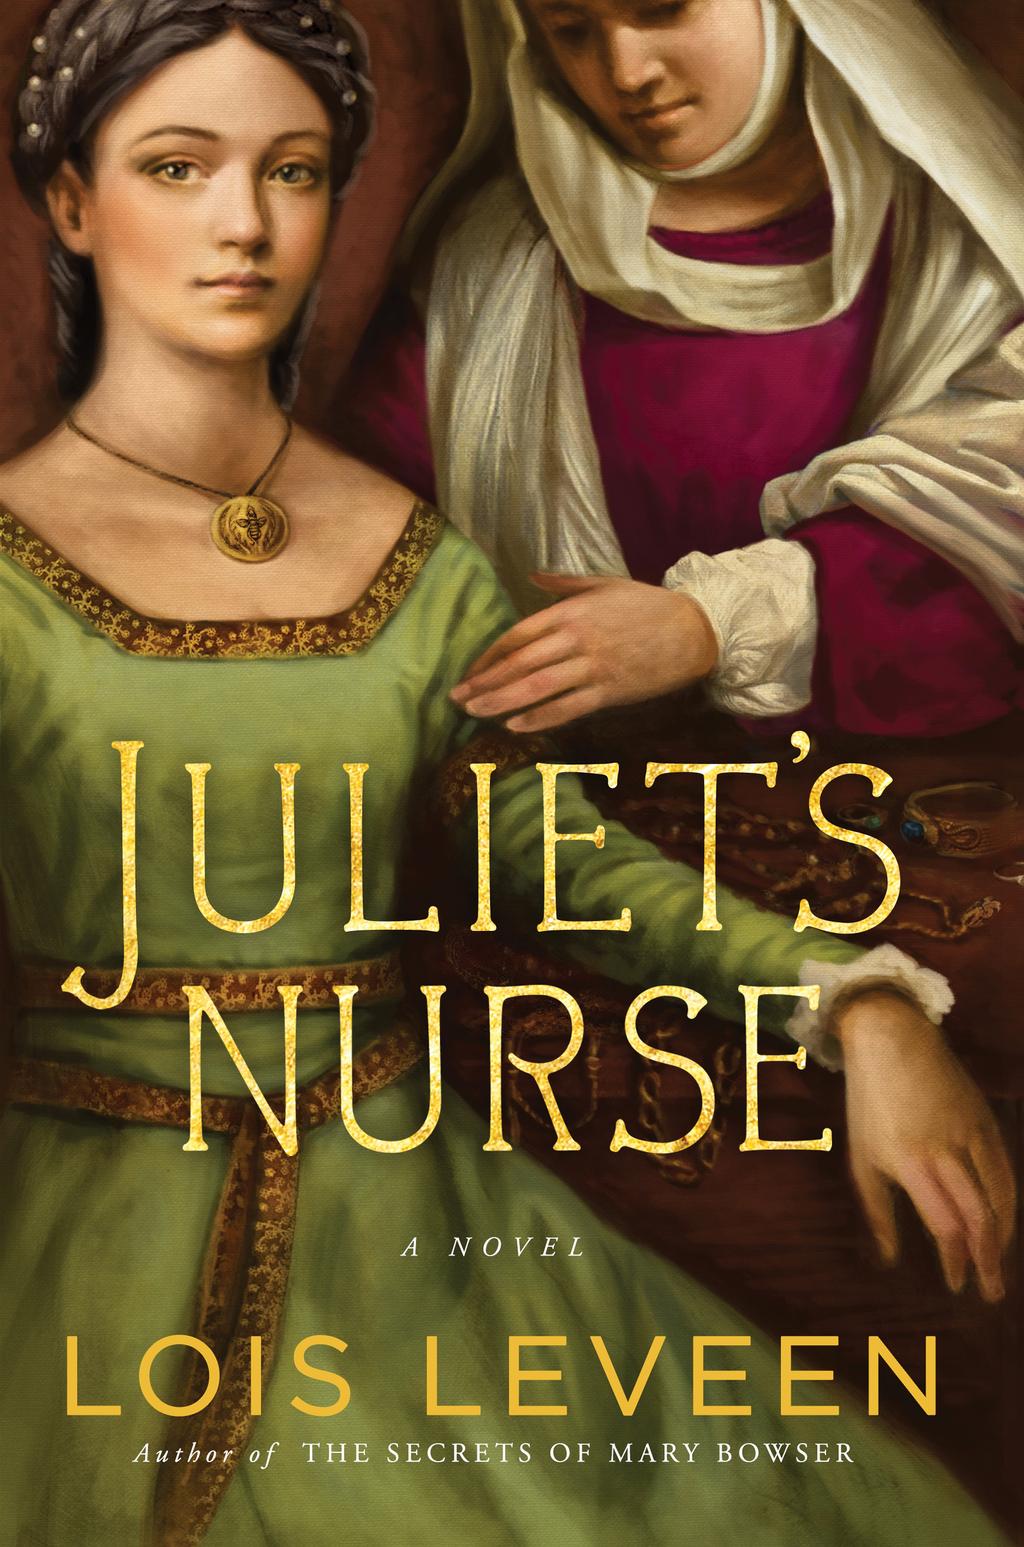 A Curriculum Guide for Juliet s Nurse by Lois Leveen About the Book Juliet's Nurse combines a prequel to Romeo and Juliet with a fresh vision of the events in the play, all through the eyes of